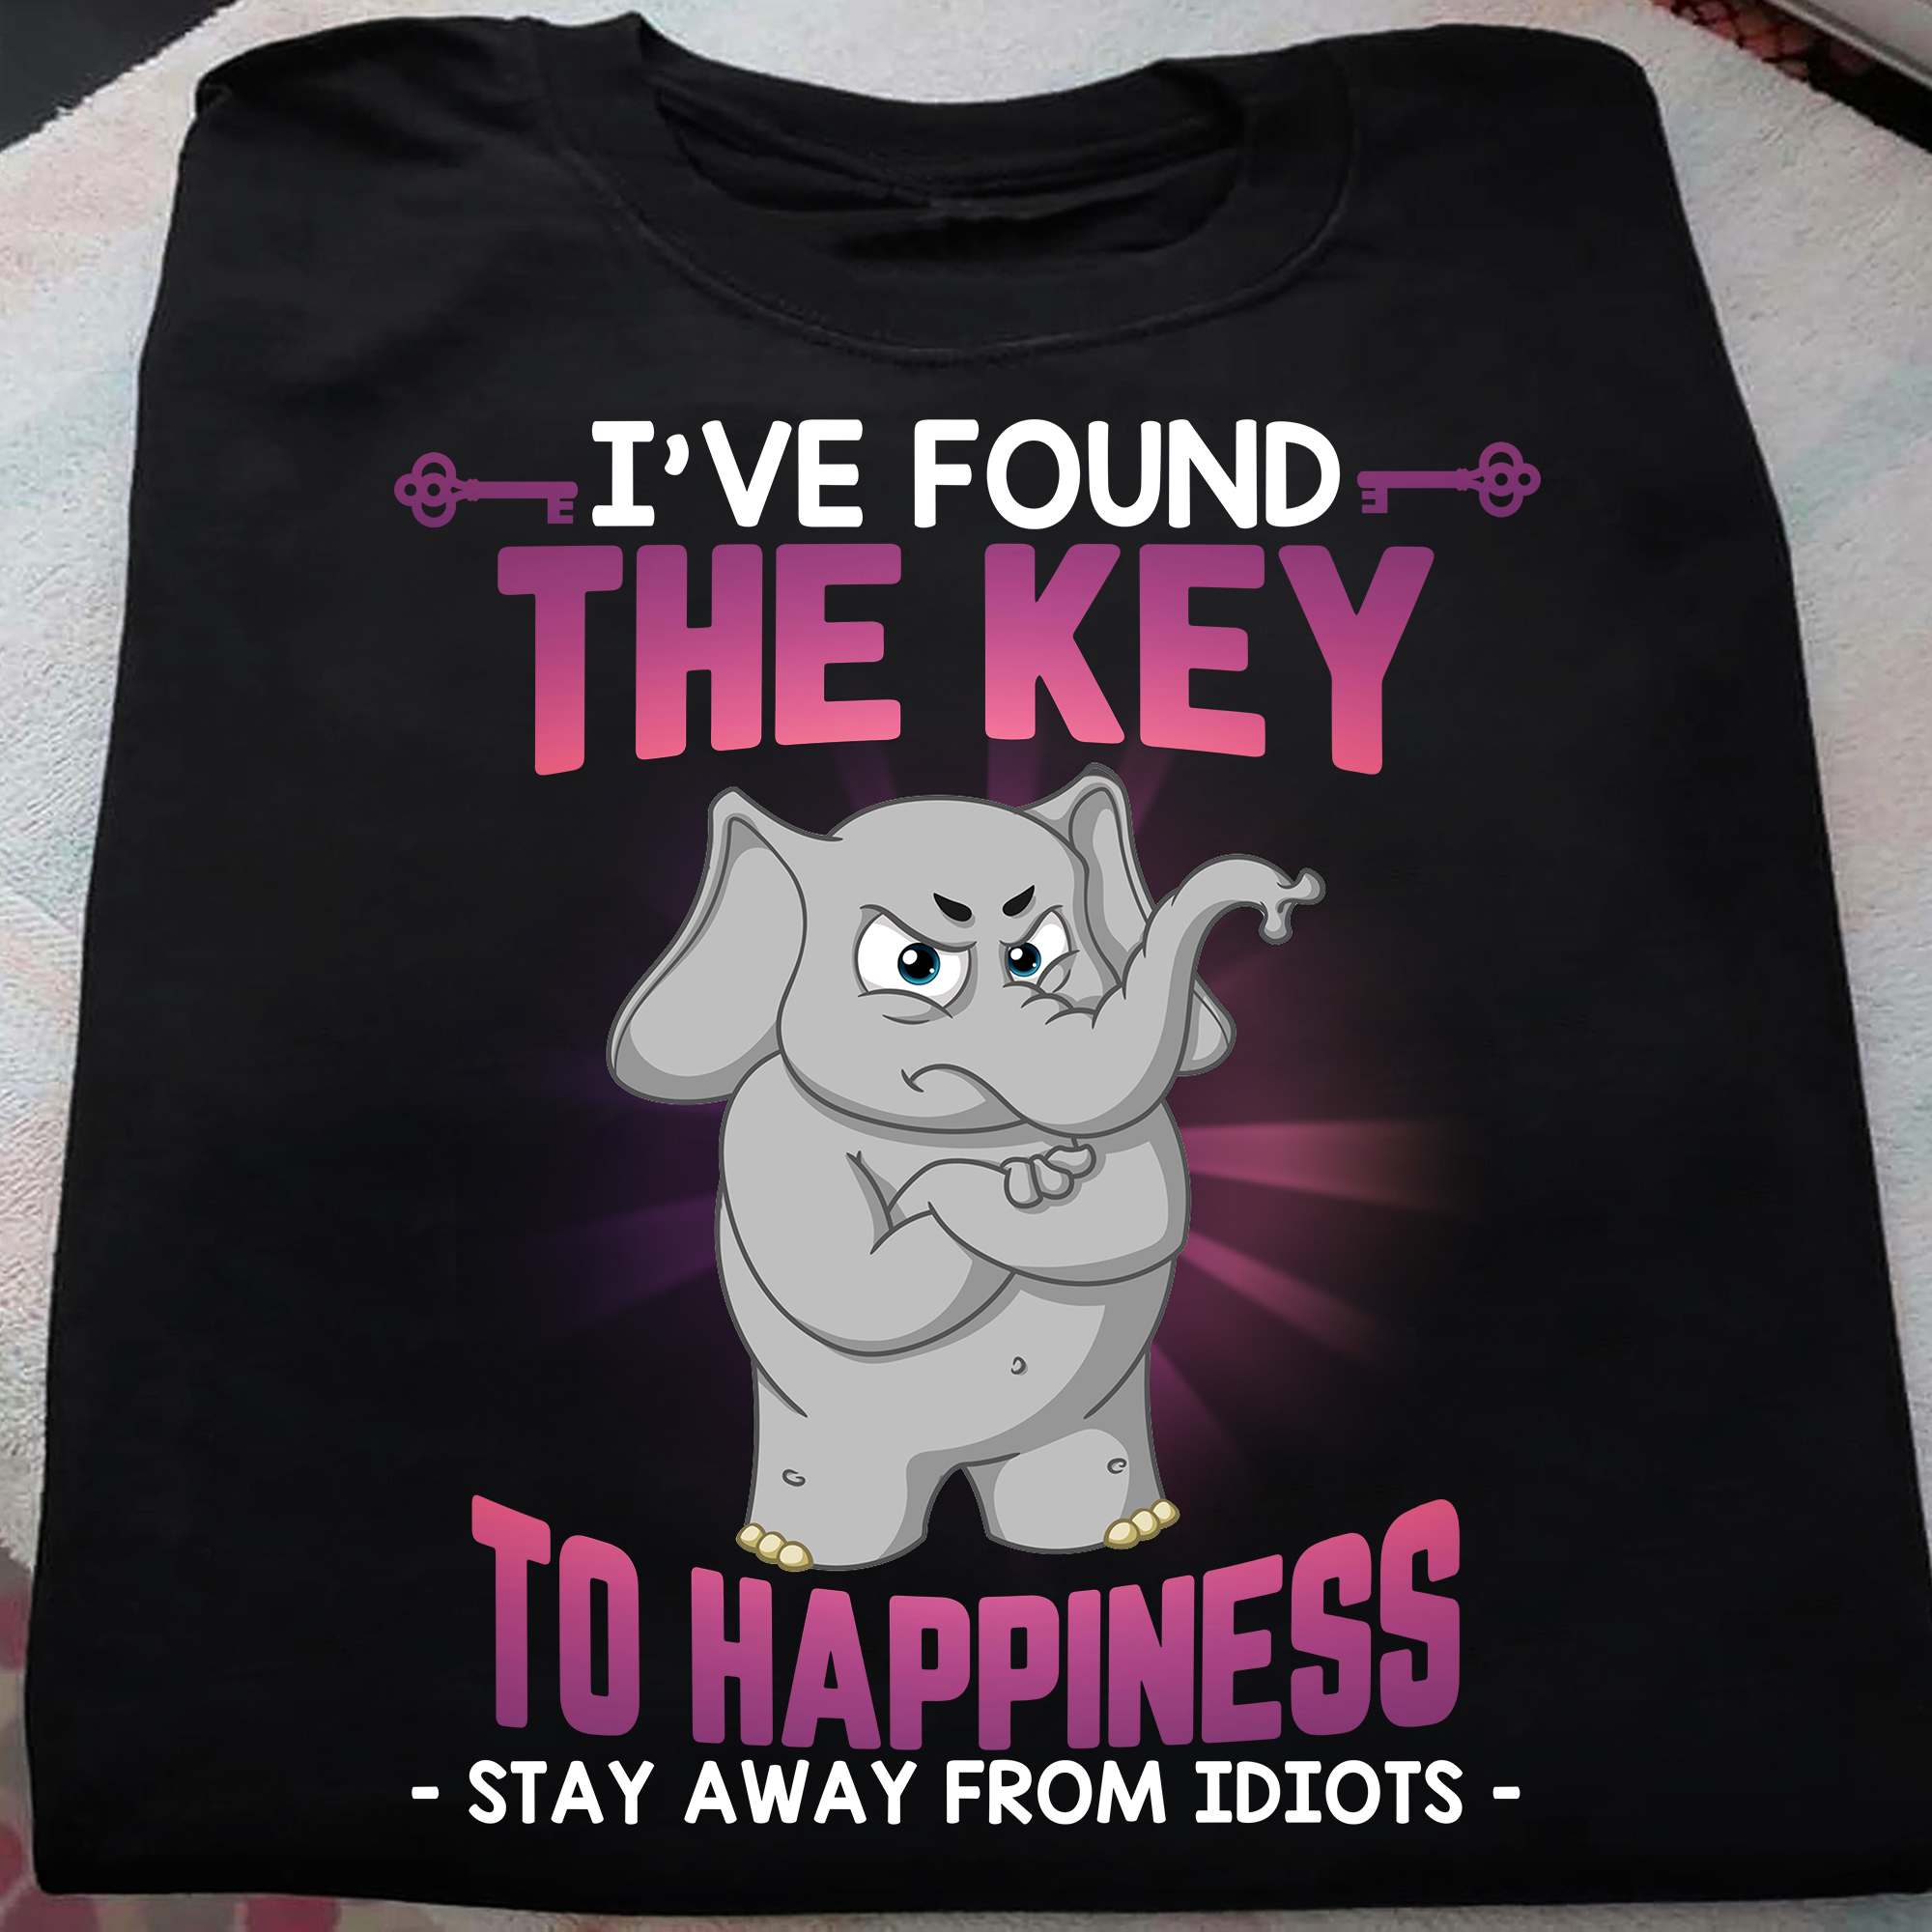 Grumpy Elephant - I've found the key to happiness stay away from idiots